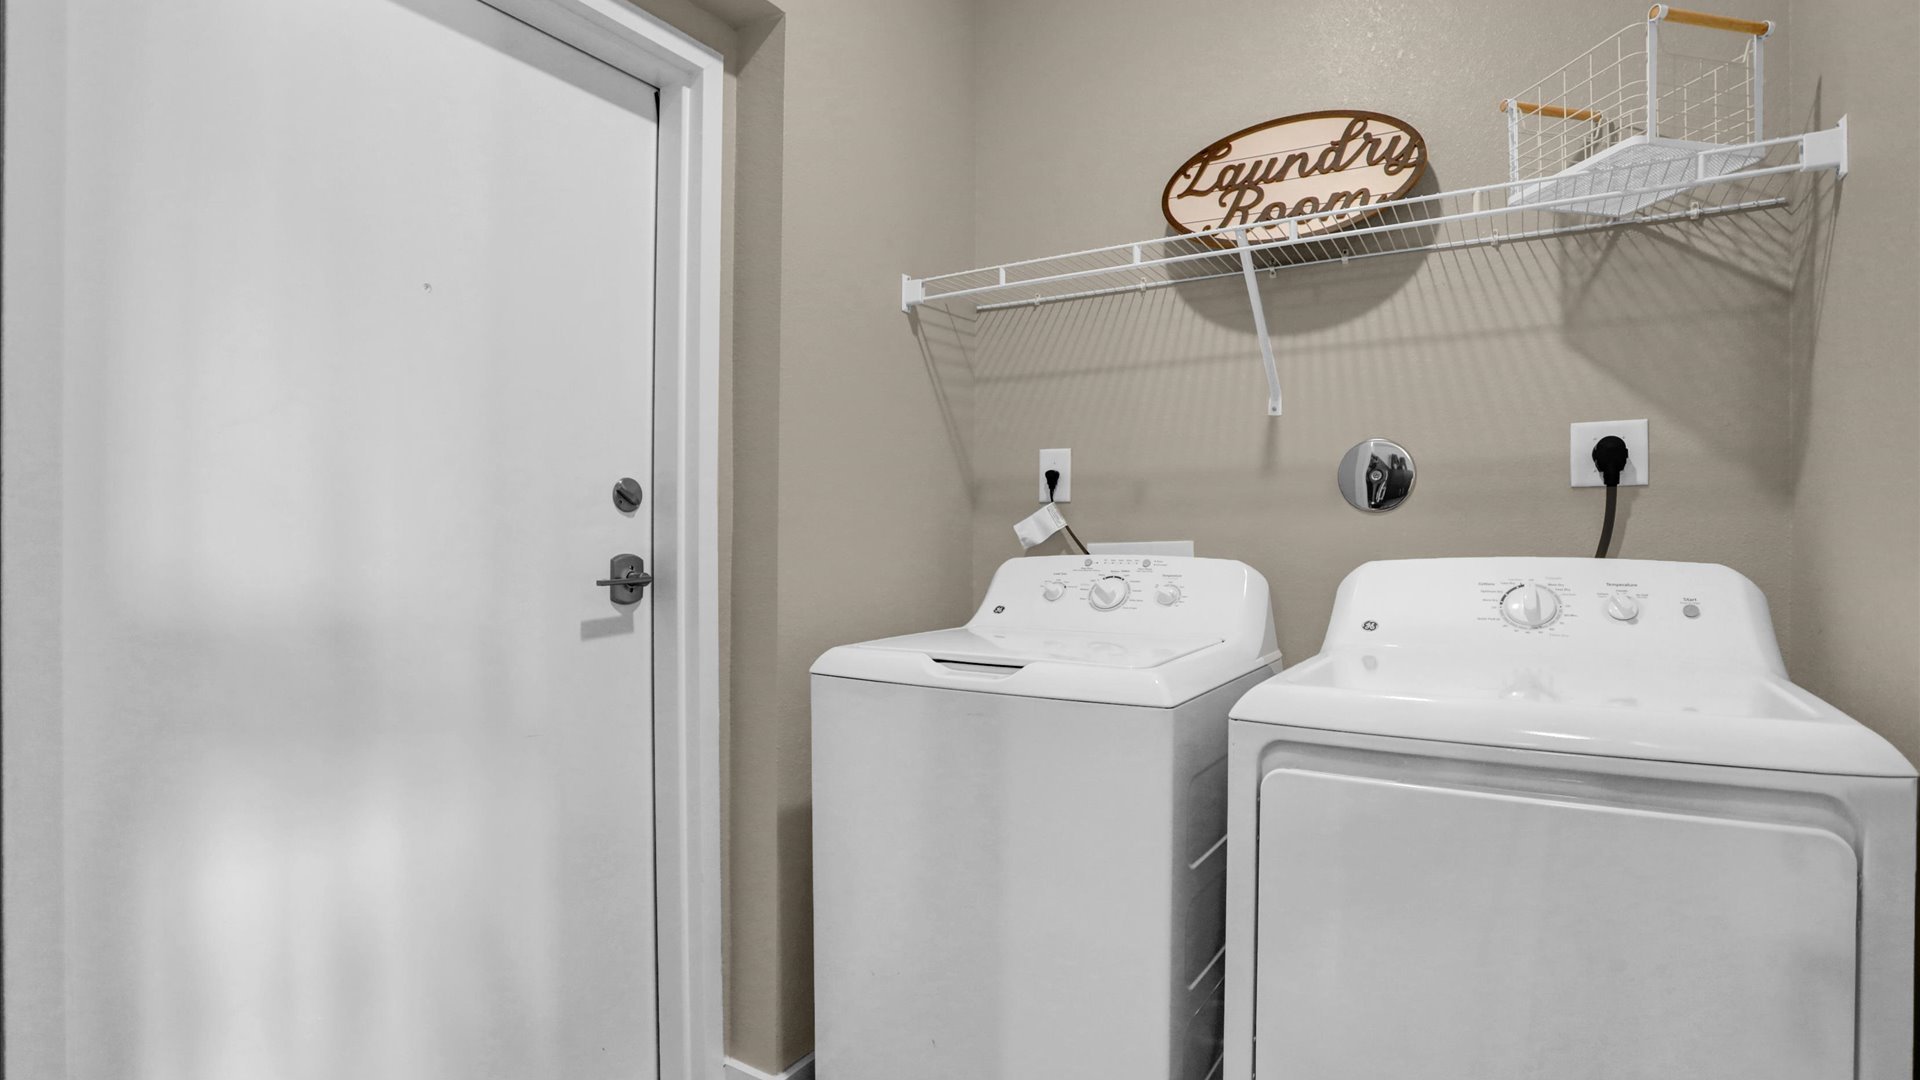 Unit Laundry at Springs at Ashby in Collierville, TN